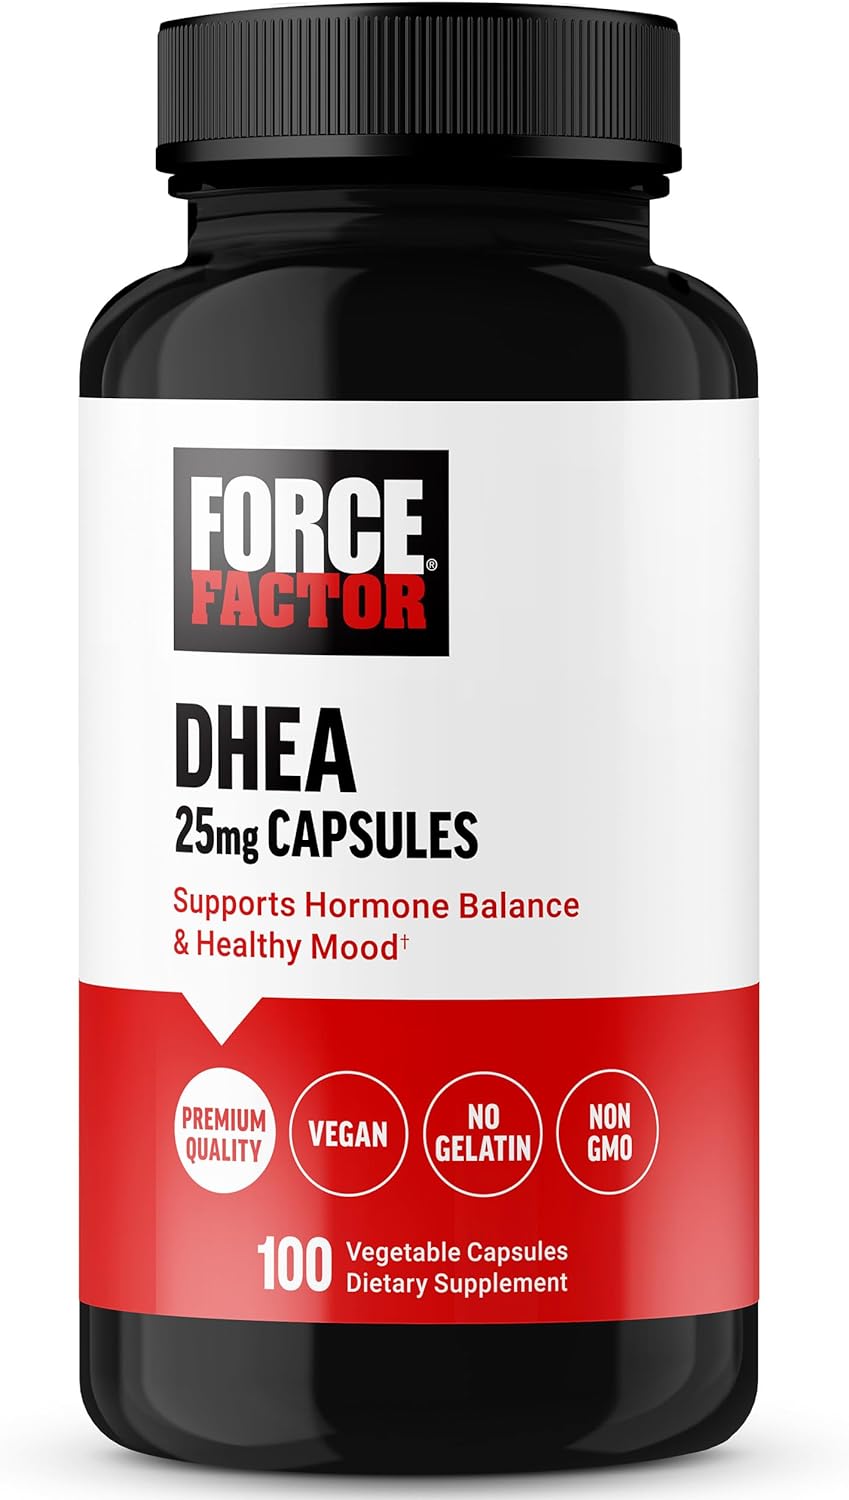 FORCE FACTOR DHEA 25mg, DHEA Supplement for Women and Men to Support Hormone Balance and Healthy Mood, Premium Quality, Vegan Friendly, Non-GMO, 100 Vegetable Capsules